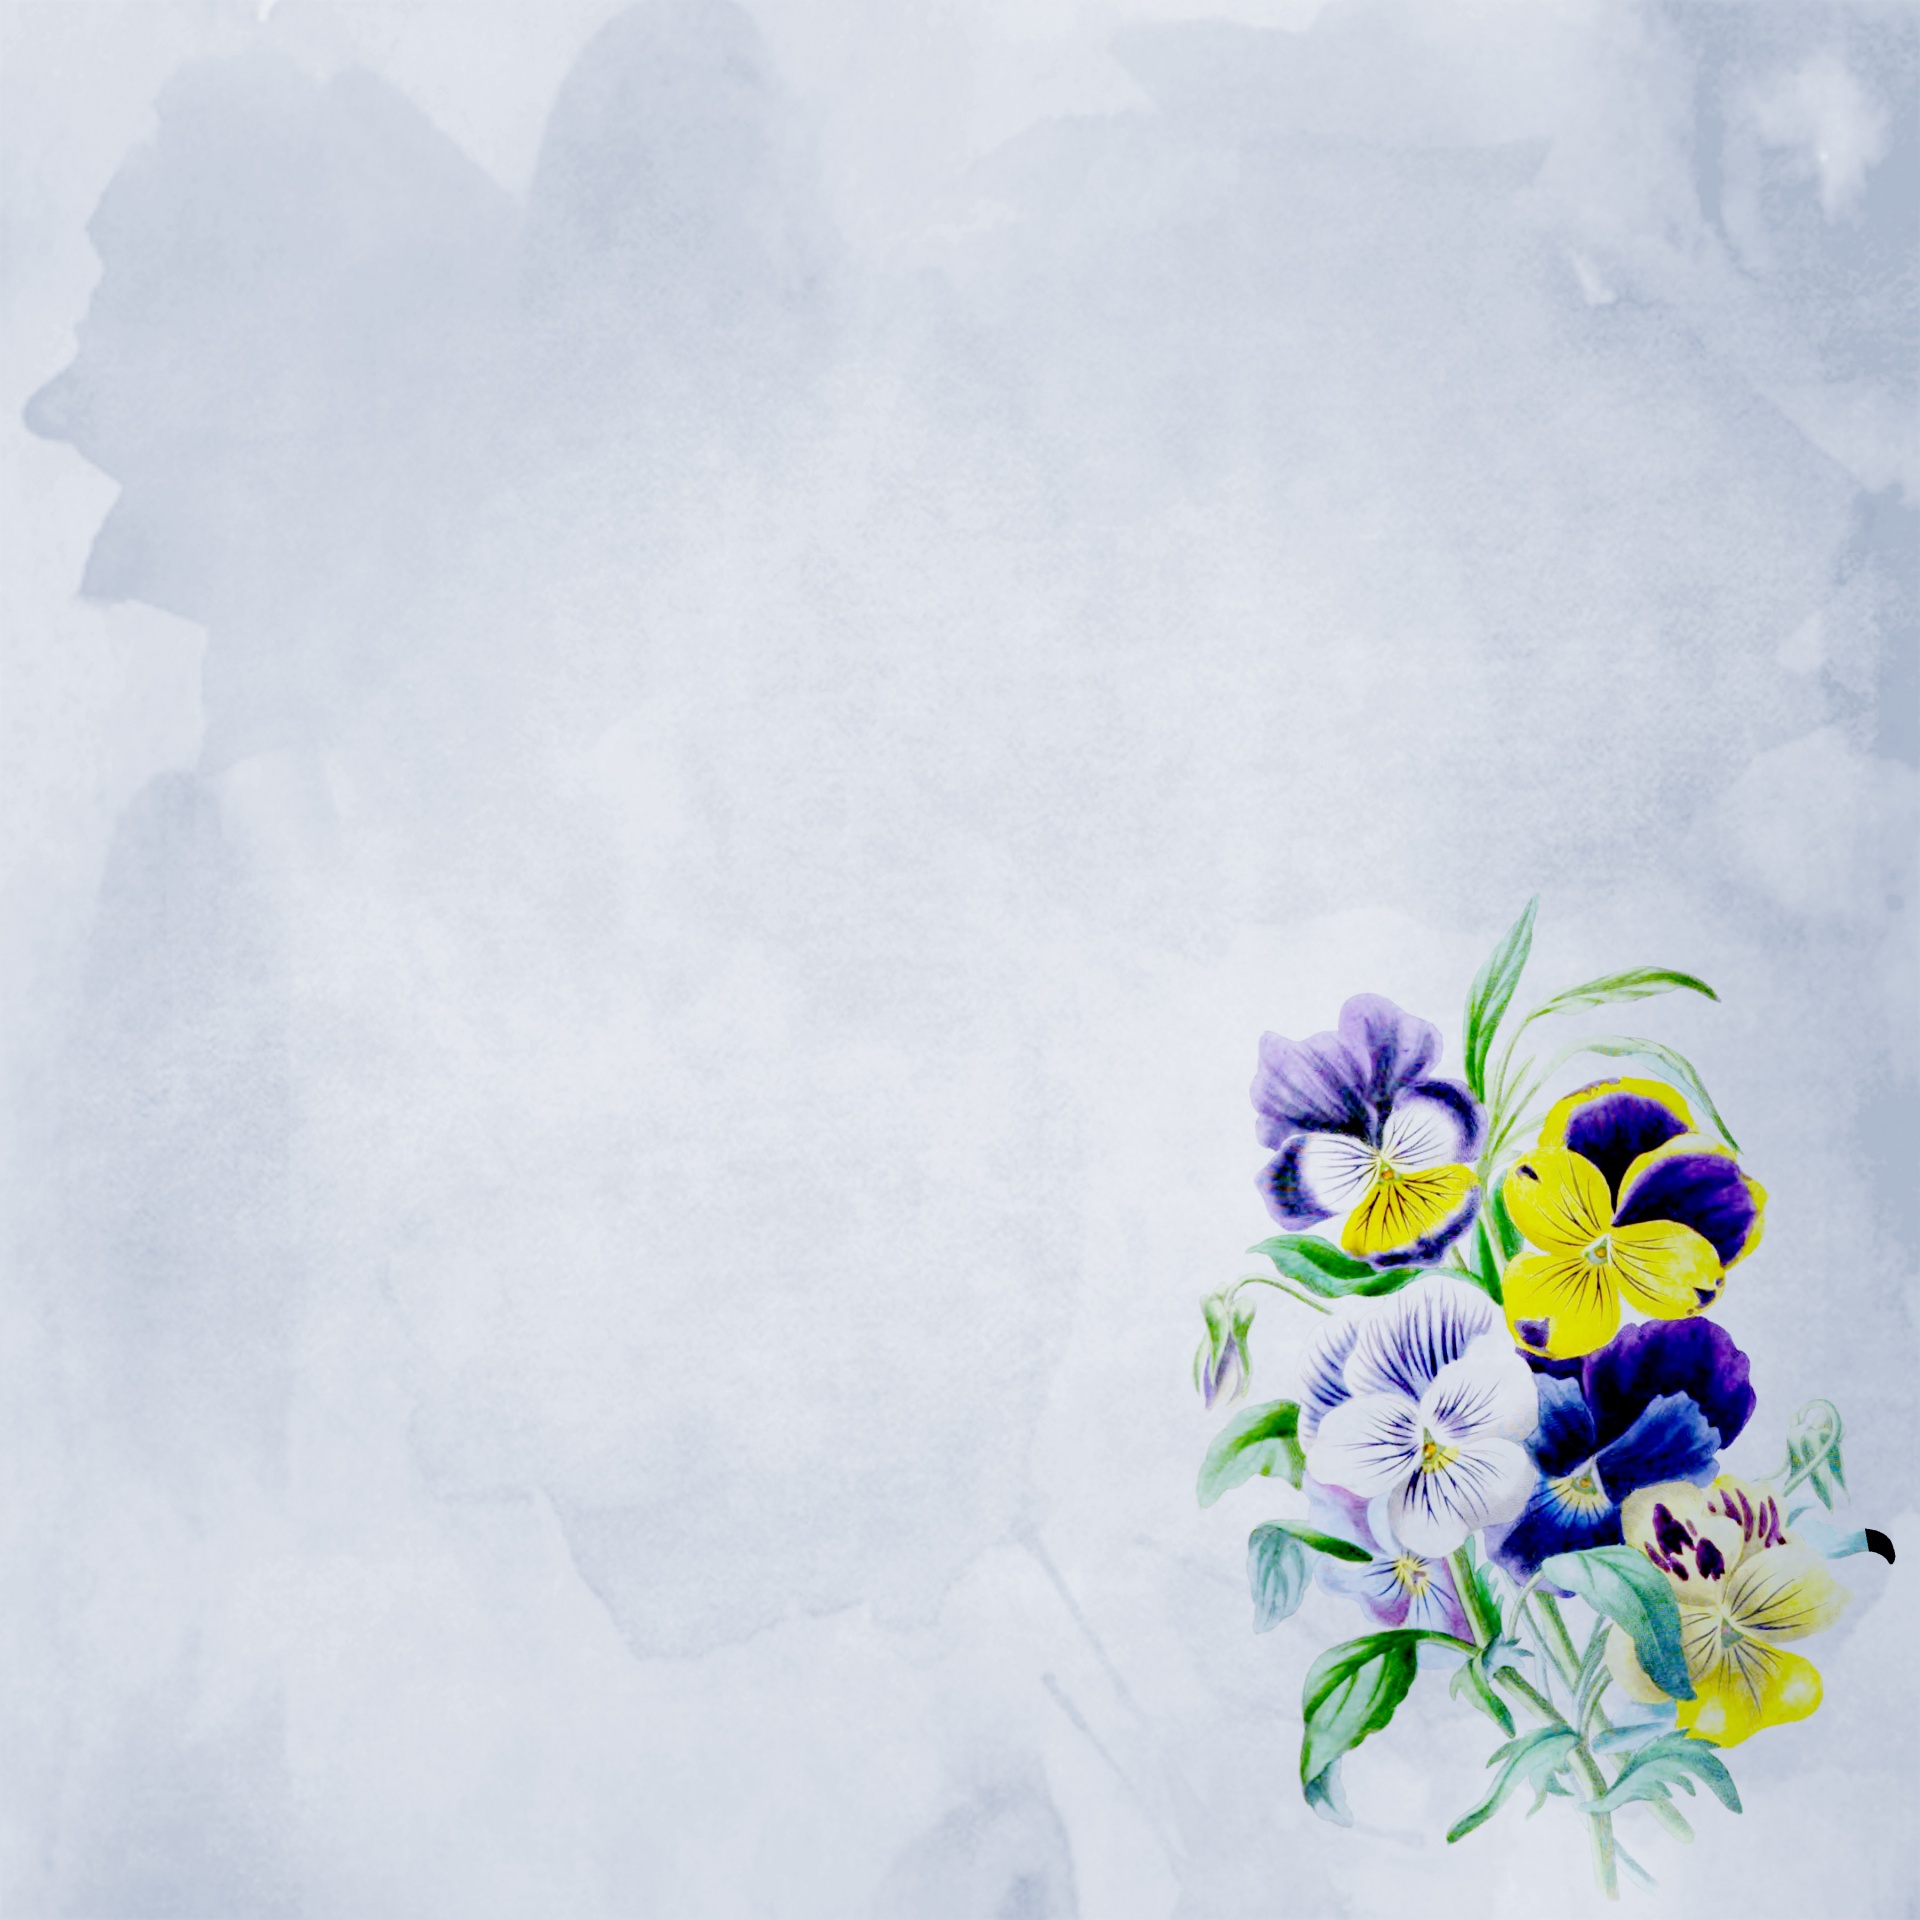 Pansy Flowers Wallpaper Background